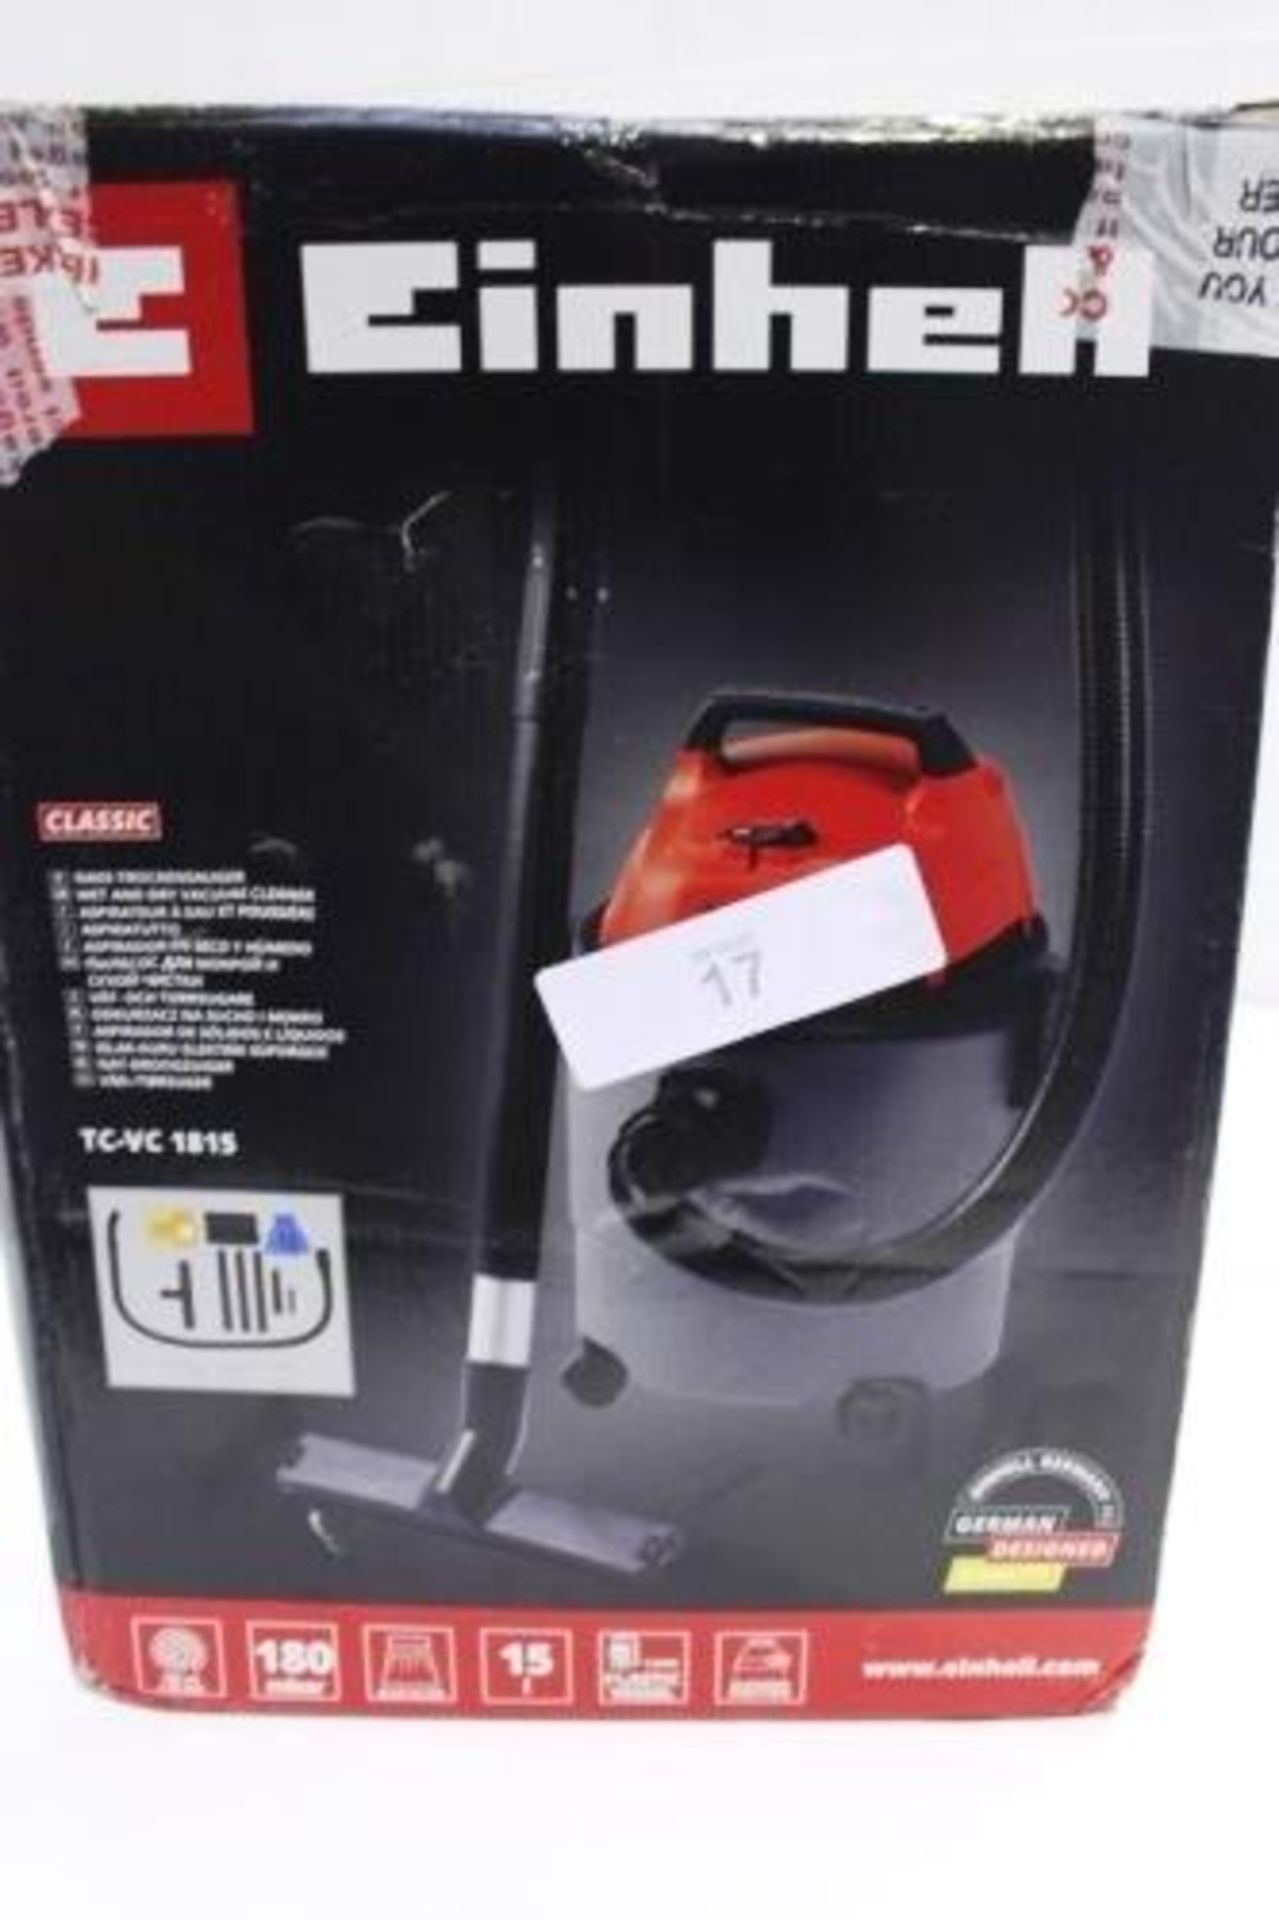 An Einhell classic wet & dry vacuum cleaner, model TC-VC1815 - new in box (ES2)